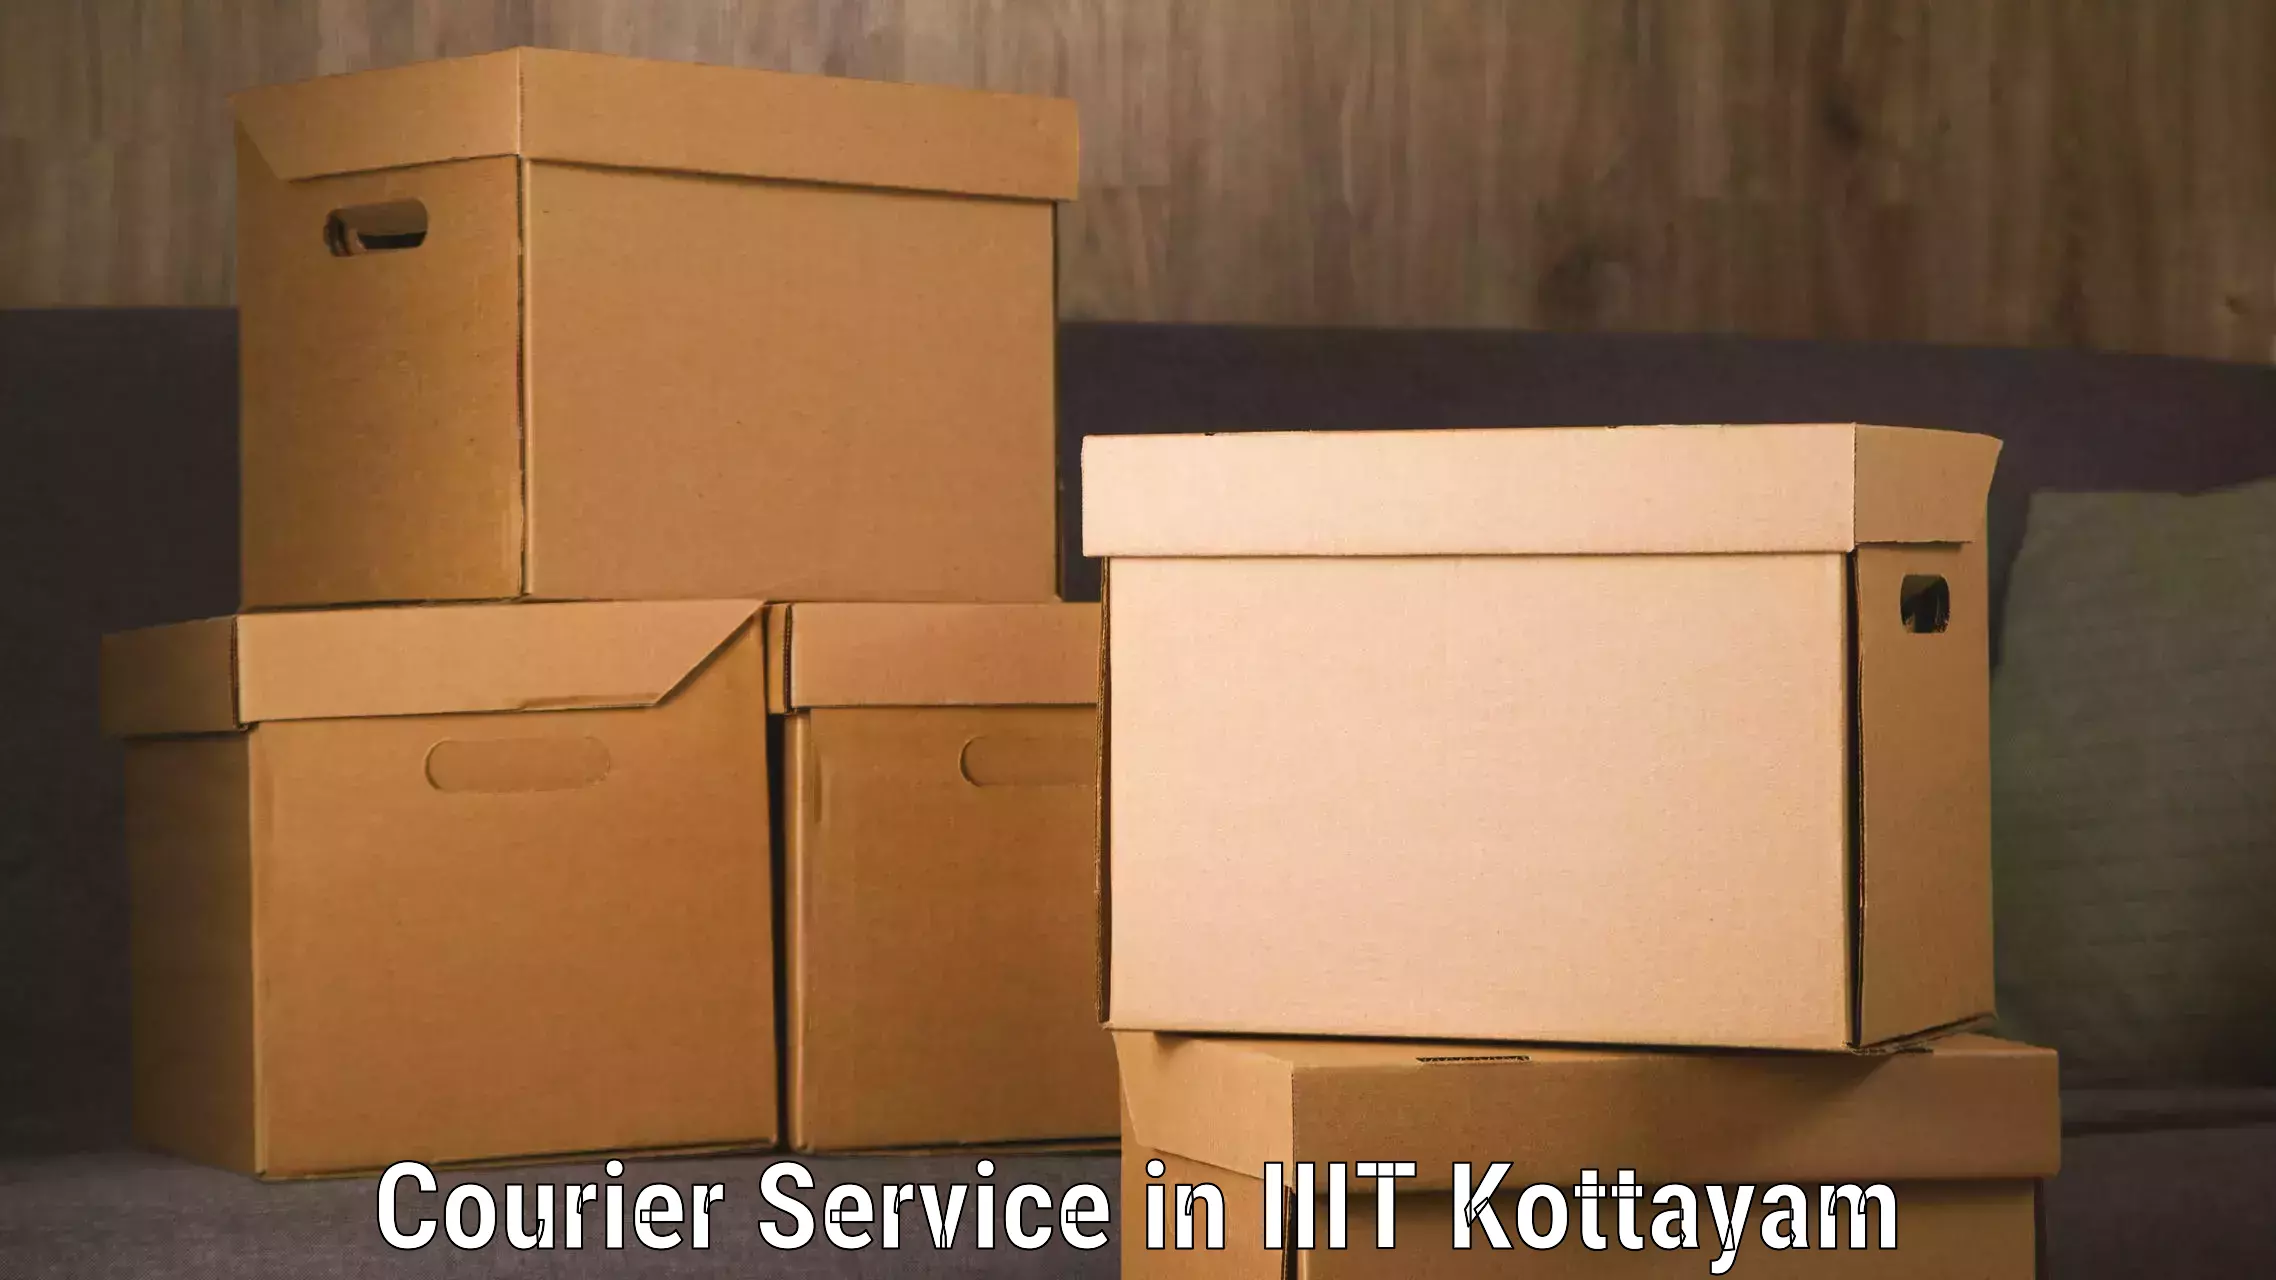 Fast delivery service in IIIT Kottayam